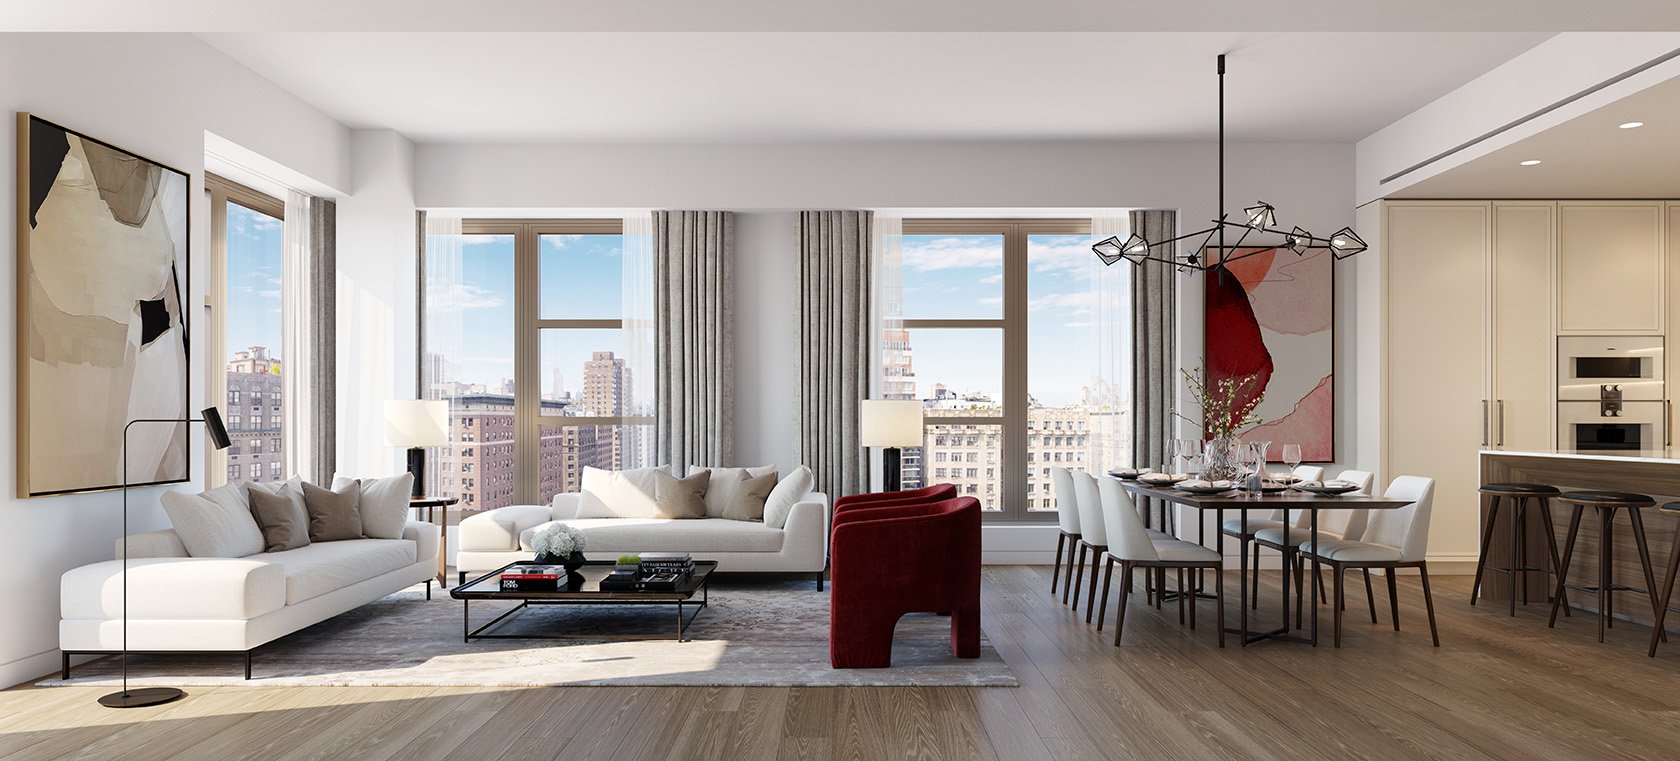   SERHANT. , the multidimensional real estate brokerage founded by Ryan Serhant of Bravo’s Million Dollar Listing New York, today announced that it has snagged its latest Manhattan takeover of a new development condominium. The 20-story building loca